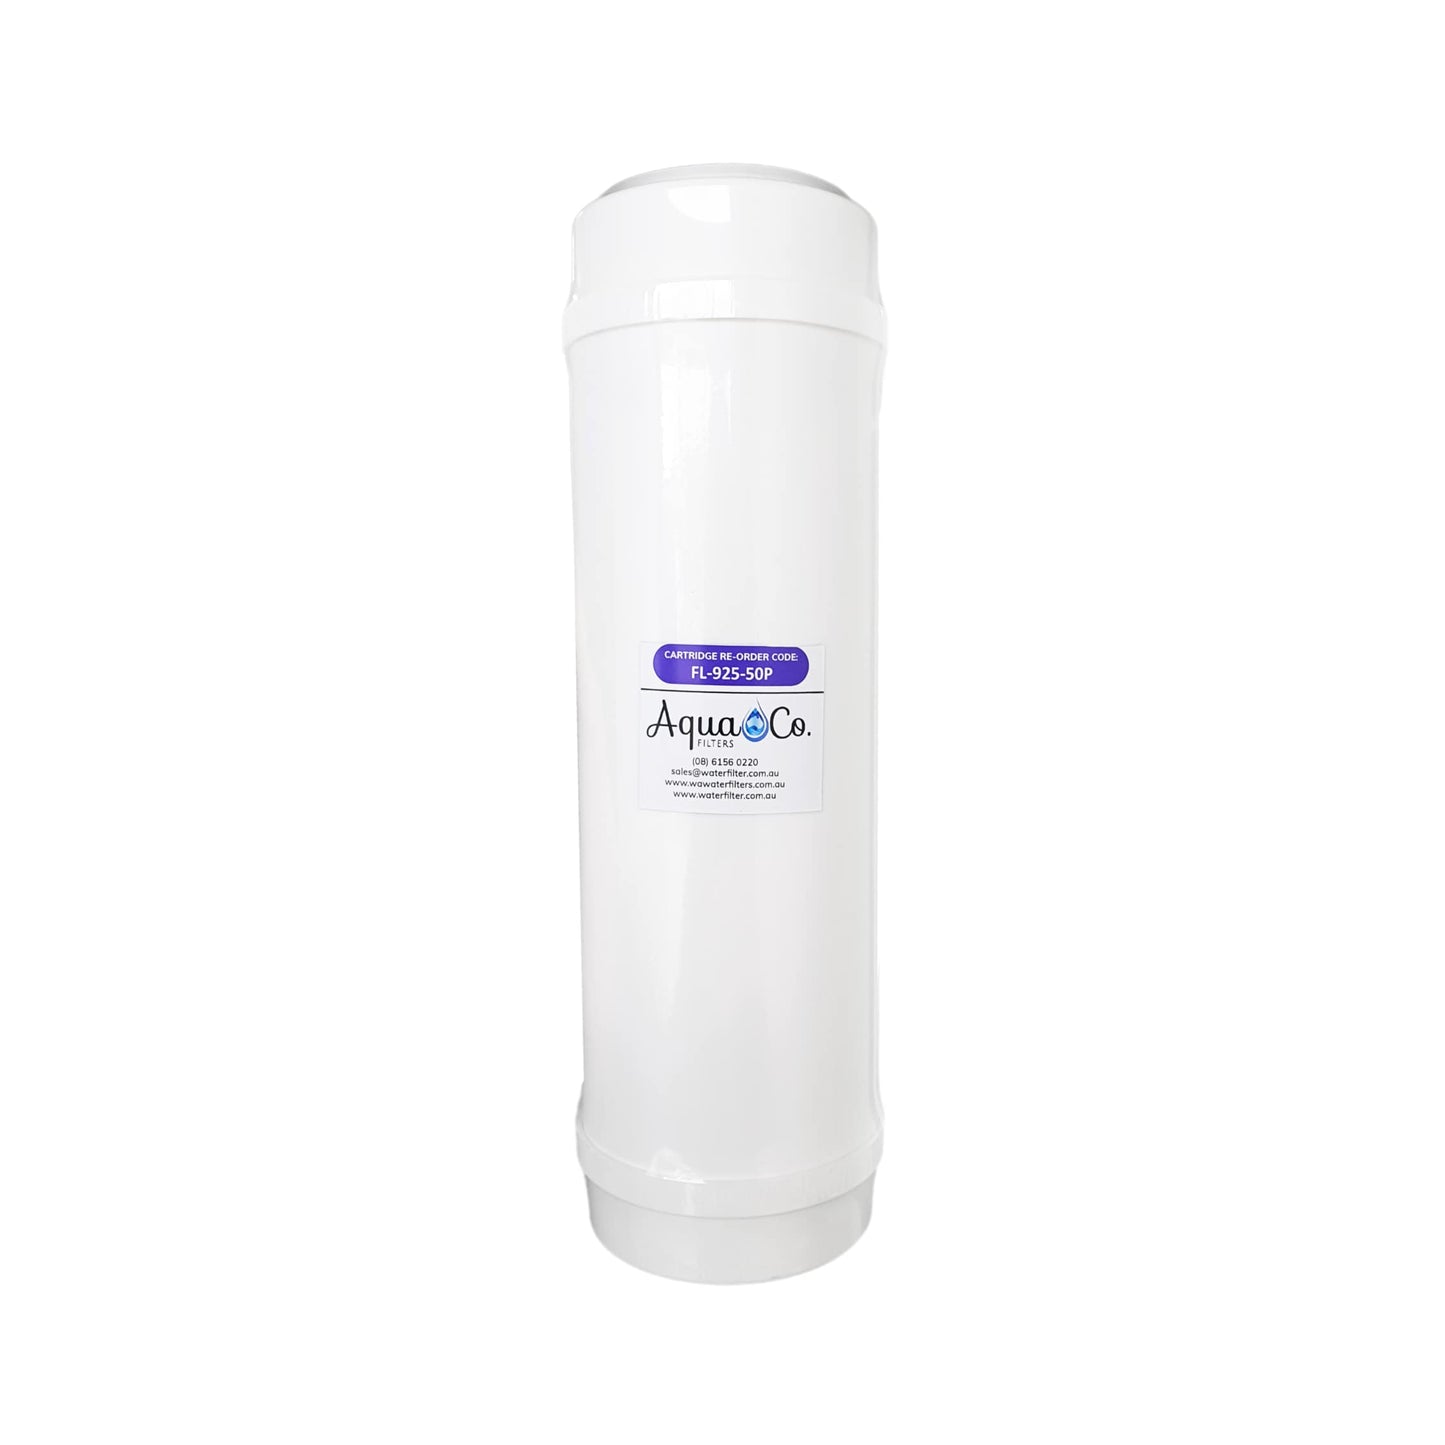 AquaCo 9" x 2.5" Fluoride Removal Replacement Filter